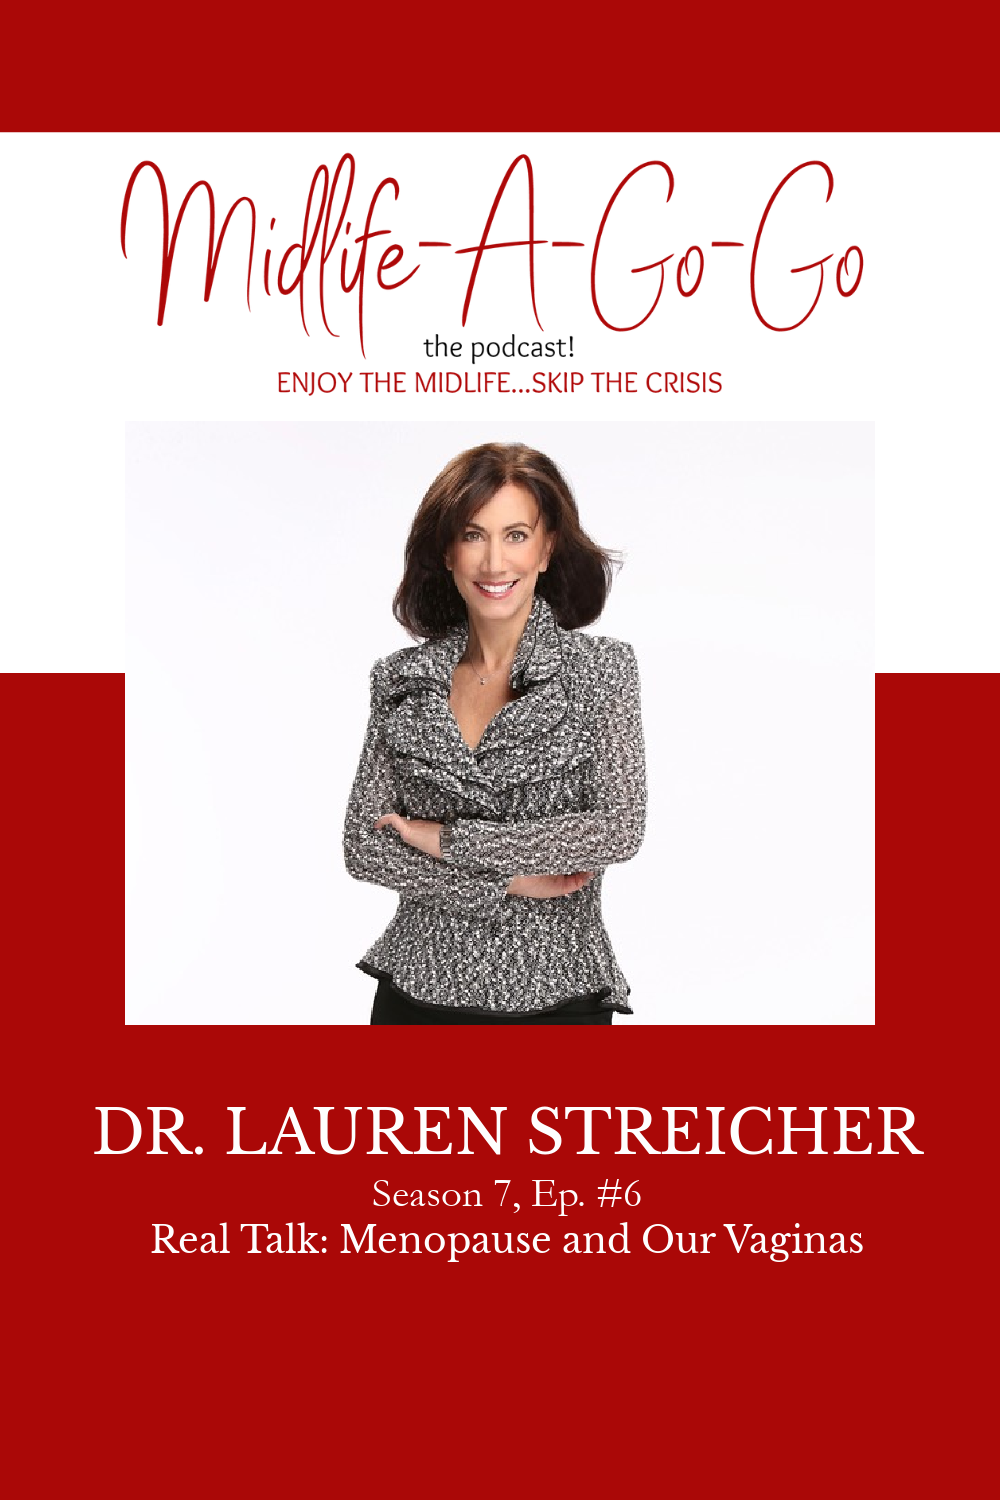 Real Talk: Menopause and Our Vaginas with Dr. Lauren Streicher